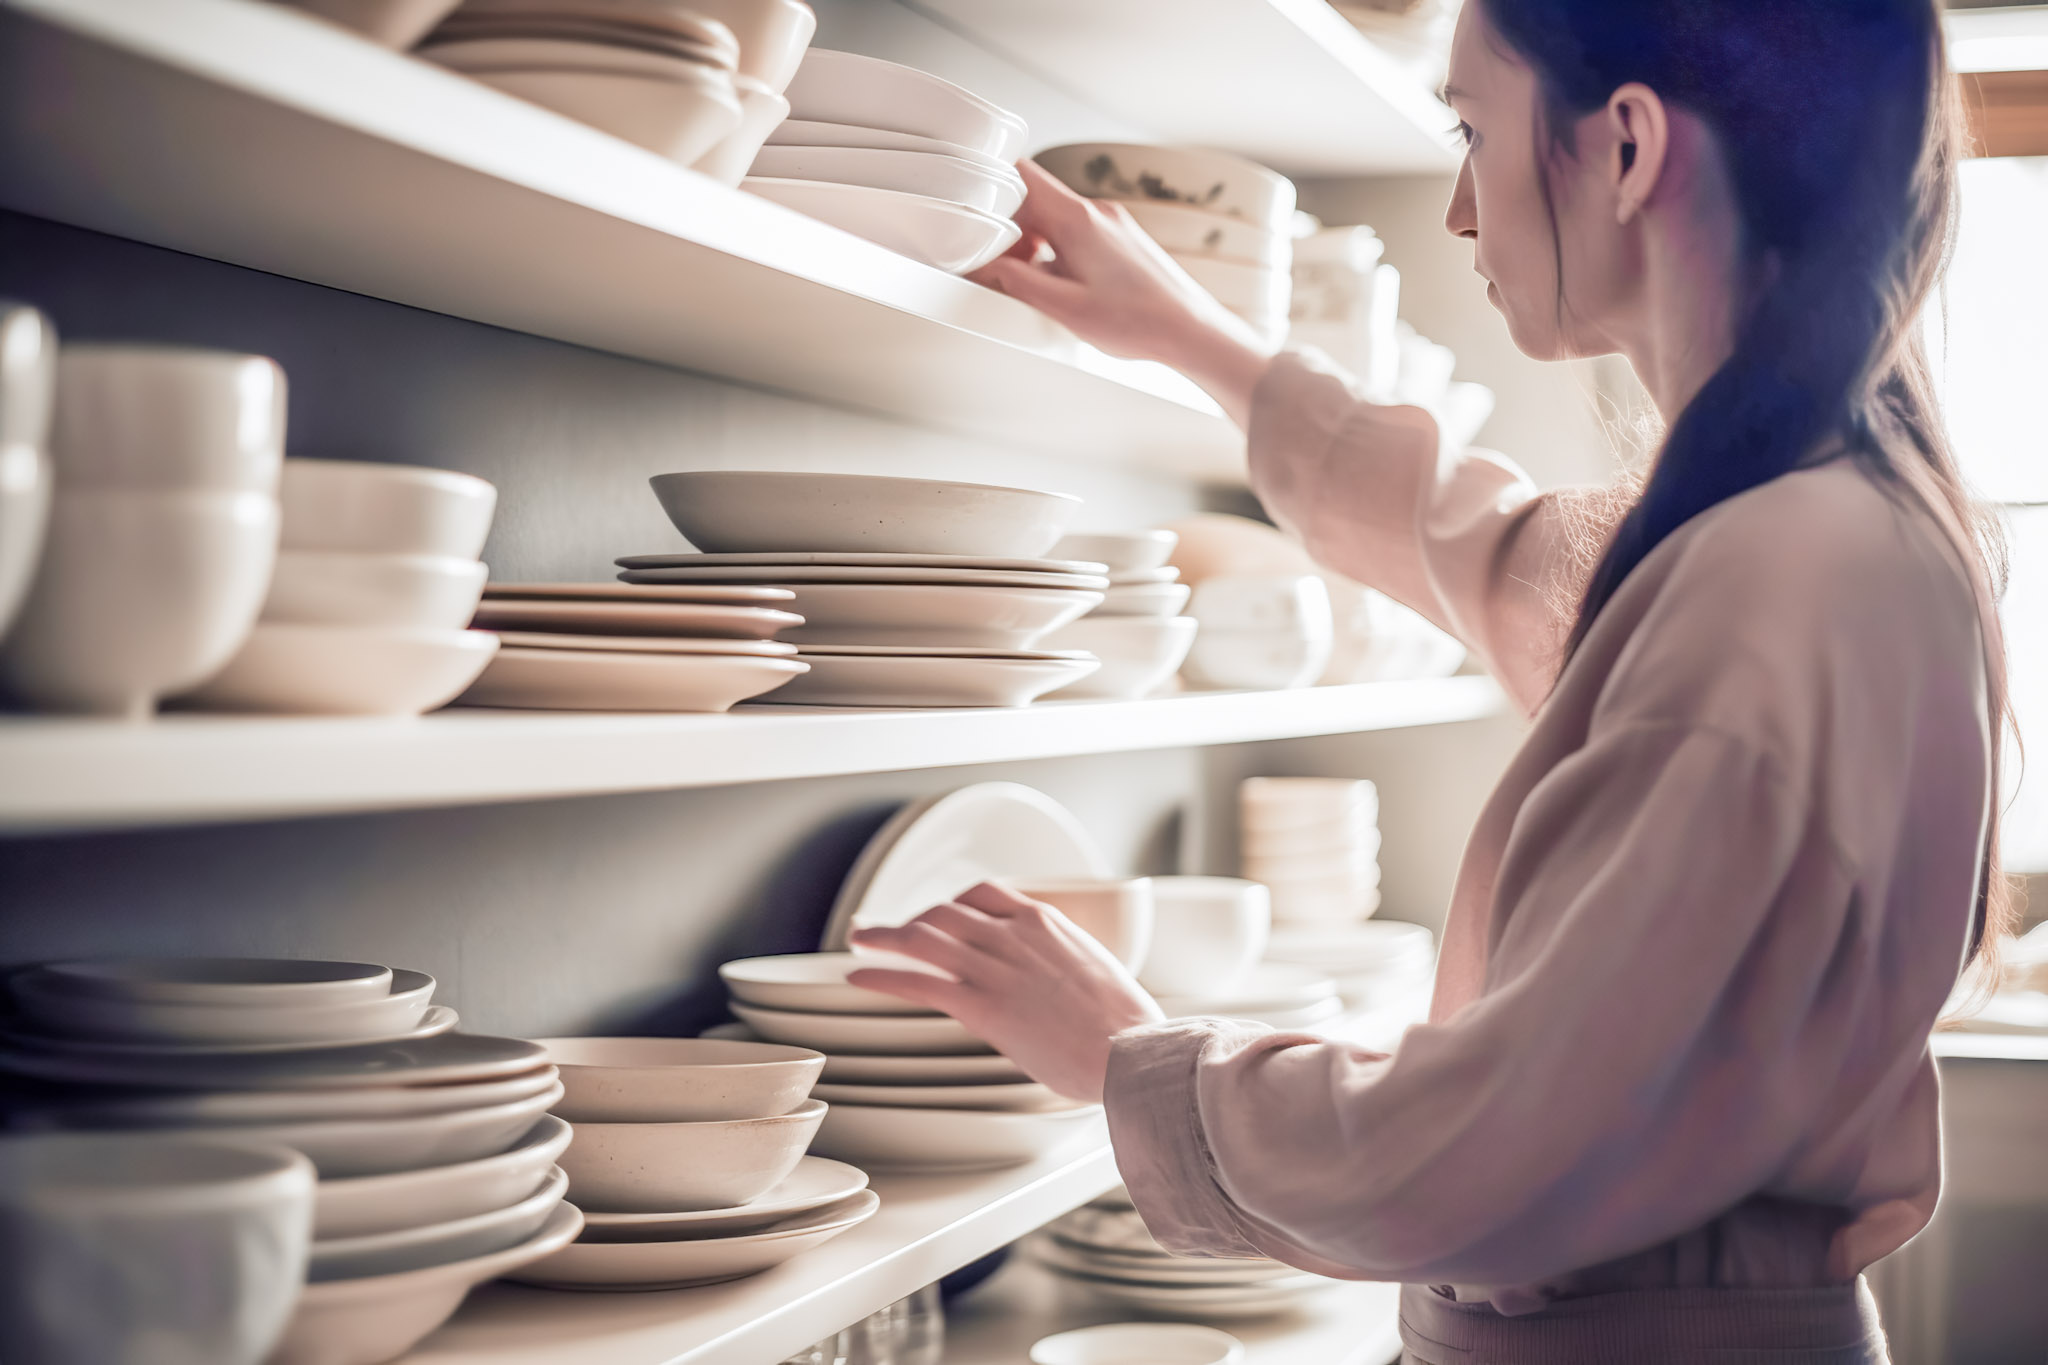 A woman stands in a walk in pantry and examines plates and dishes. This article covers choosing the perfect ceramic serveware for your table settings.